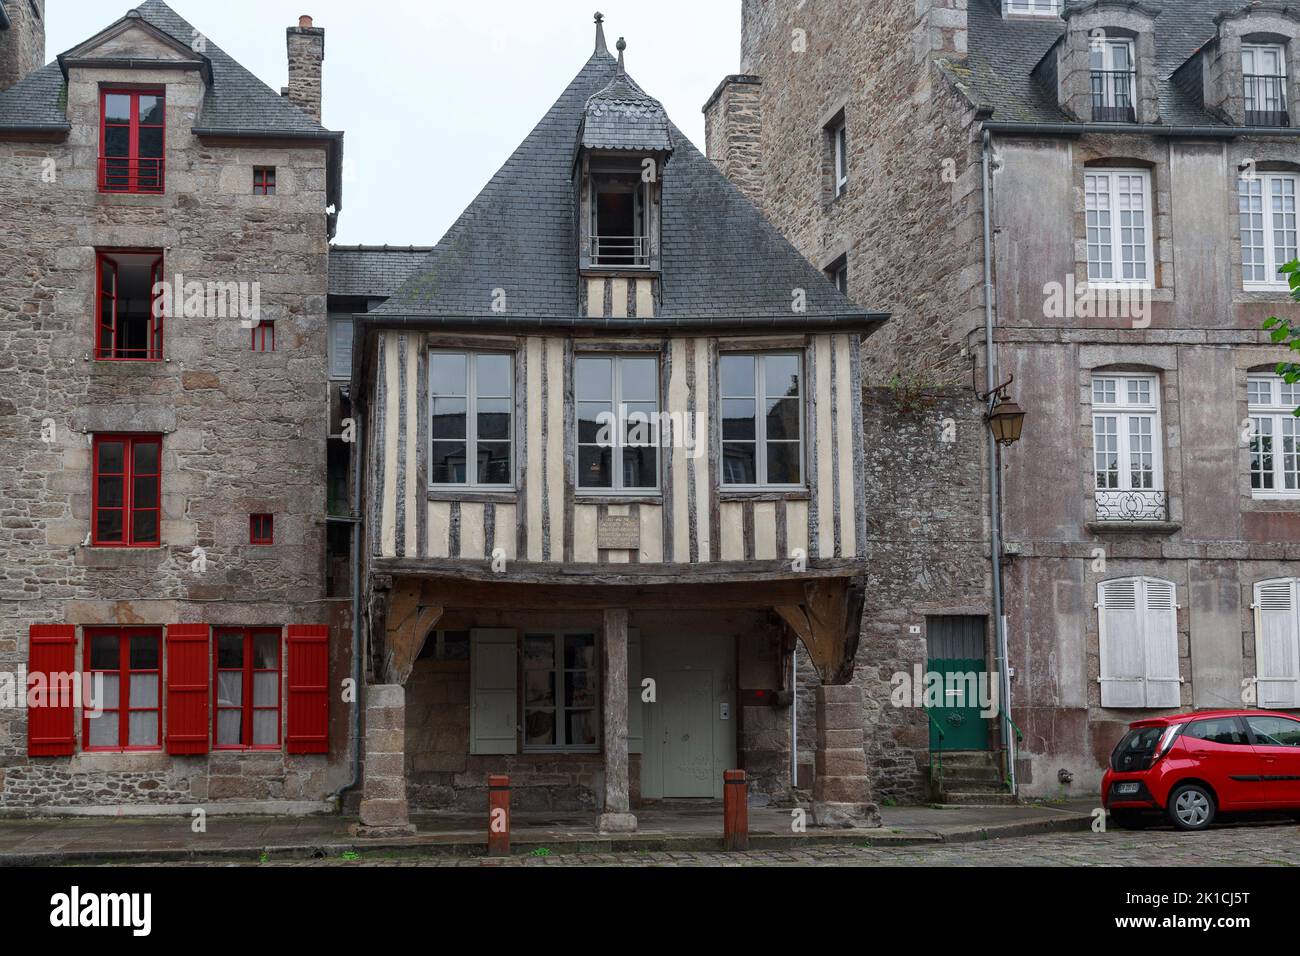 DINAN, FRANCE - SEPTEMBER 4, 2019: These are residential stone and half-timbered houses of the medieval Saint Sauveur square. Stock Photo